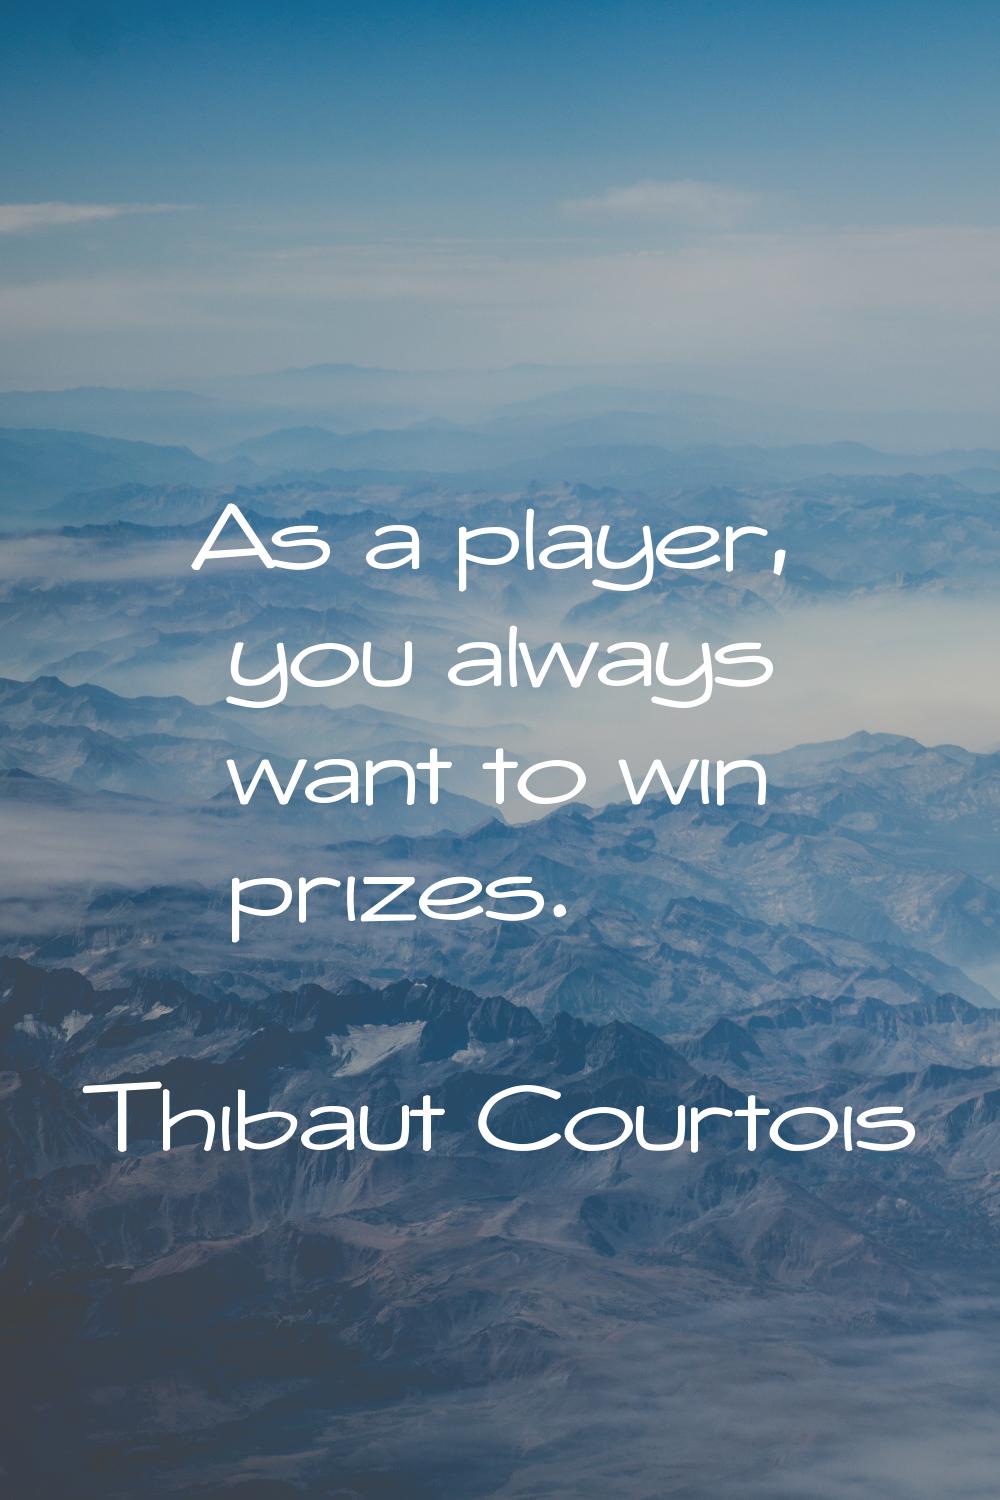 As a player, you always want to win prizes.